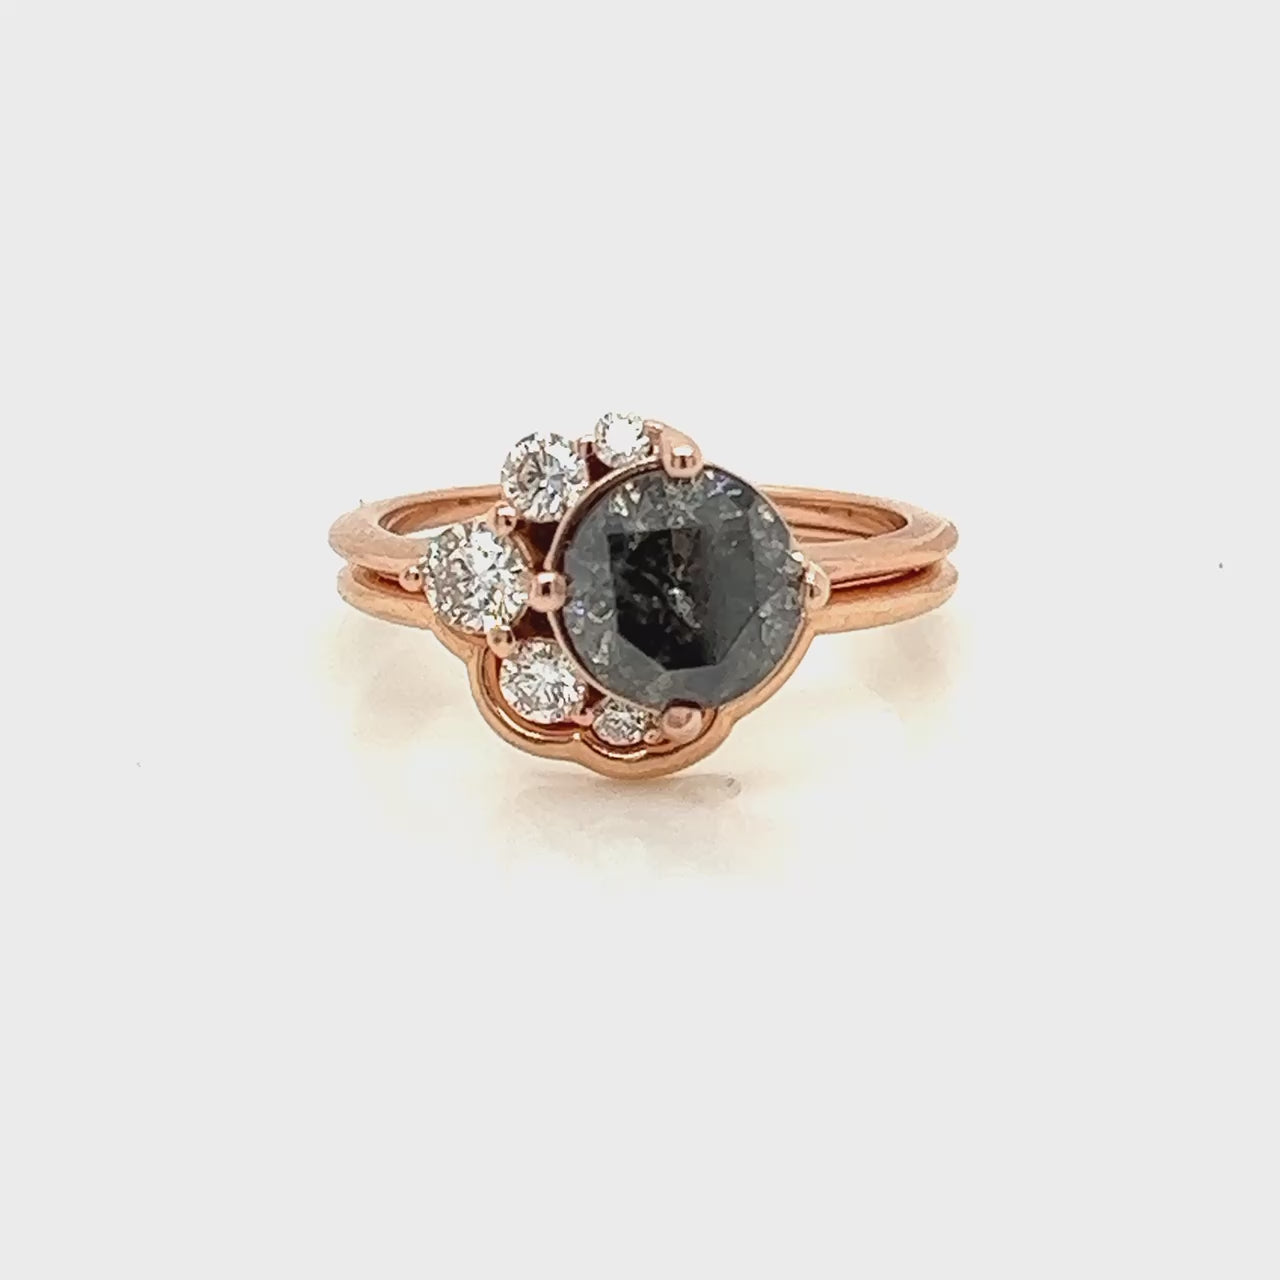 Carell Ring + Band with a 1.98 Carat Round Black Salt and Pepper Diamond and White Accent Diamonds in 14k Rose Gold - Ready to Size and Ship